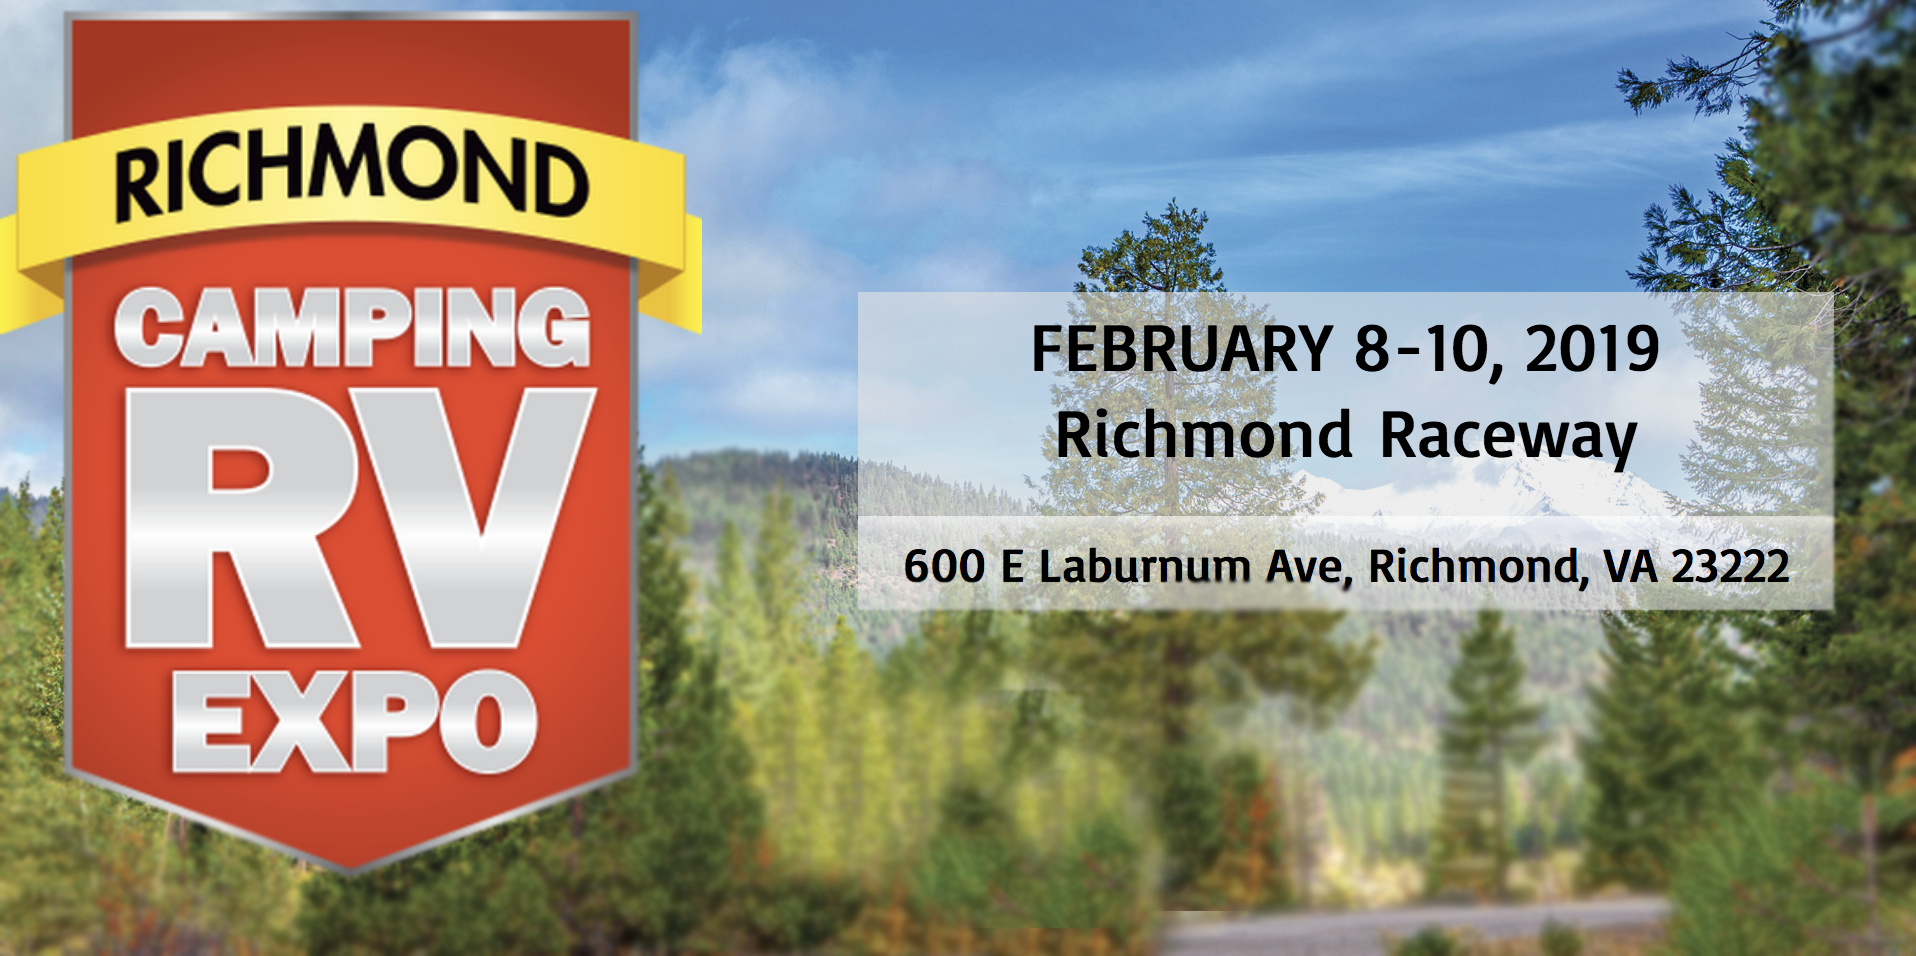 Richmond Camping RV Expo GDRV4Life Your Connection to the Grand